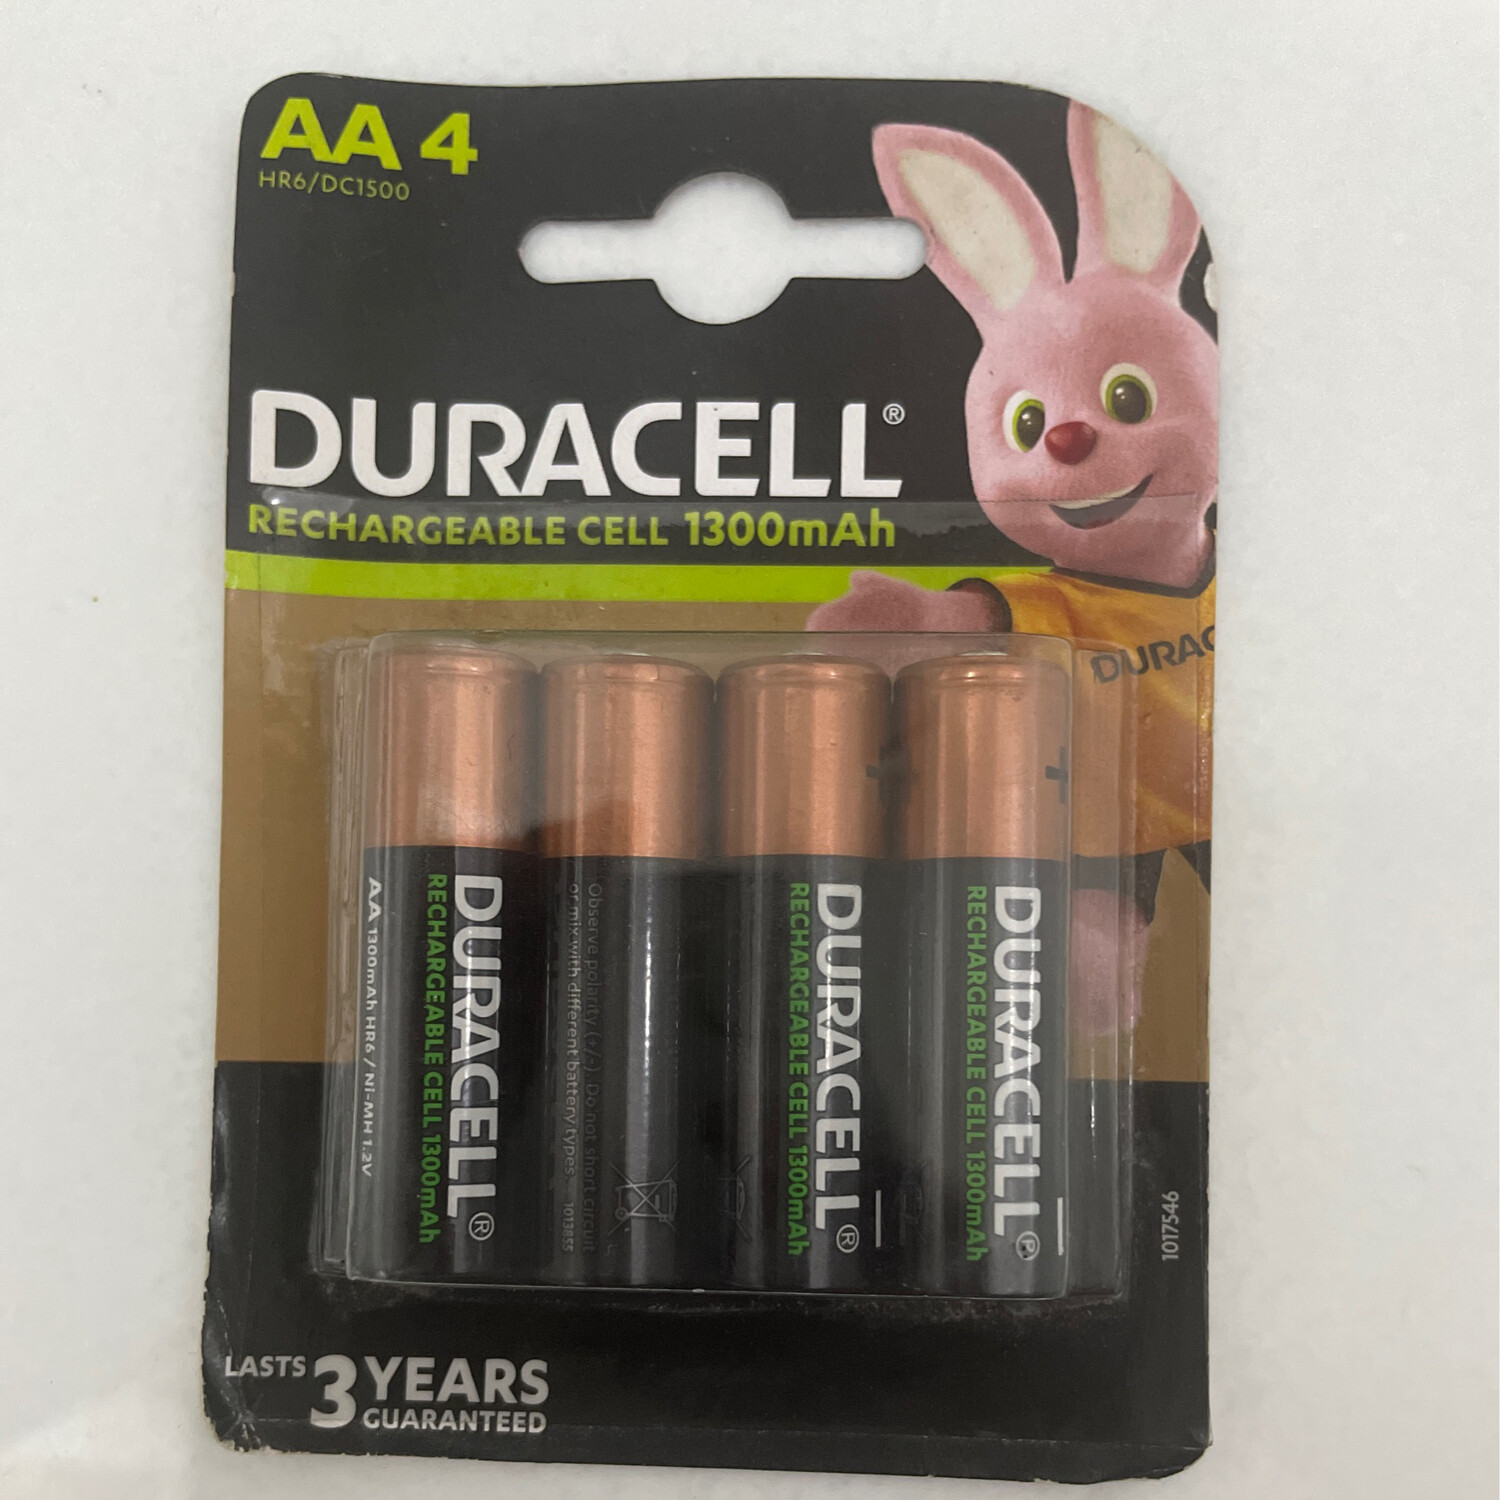 Duracell AA,4Batteries,1300mAh,Rechargeable Plus-Rs.646 – LT